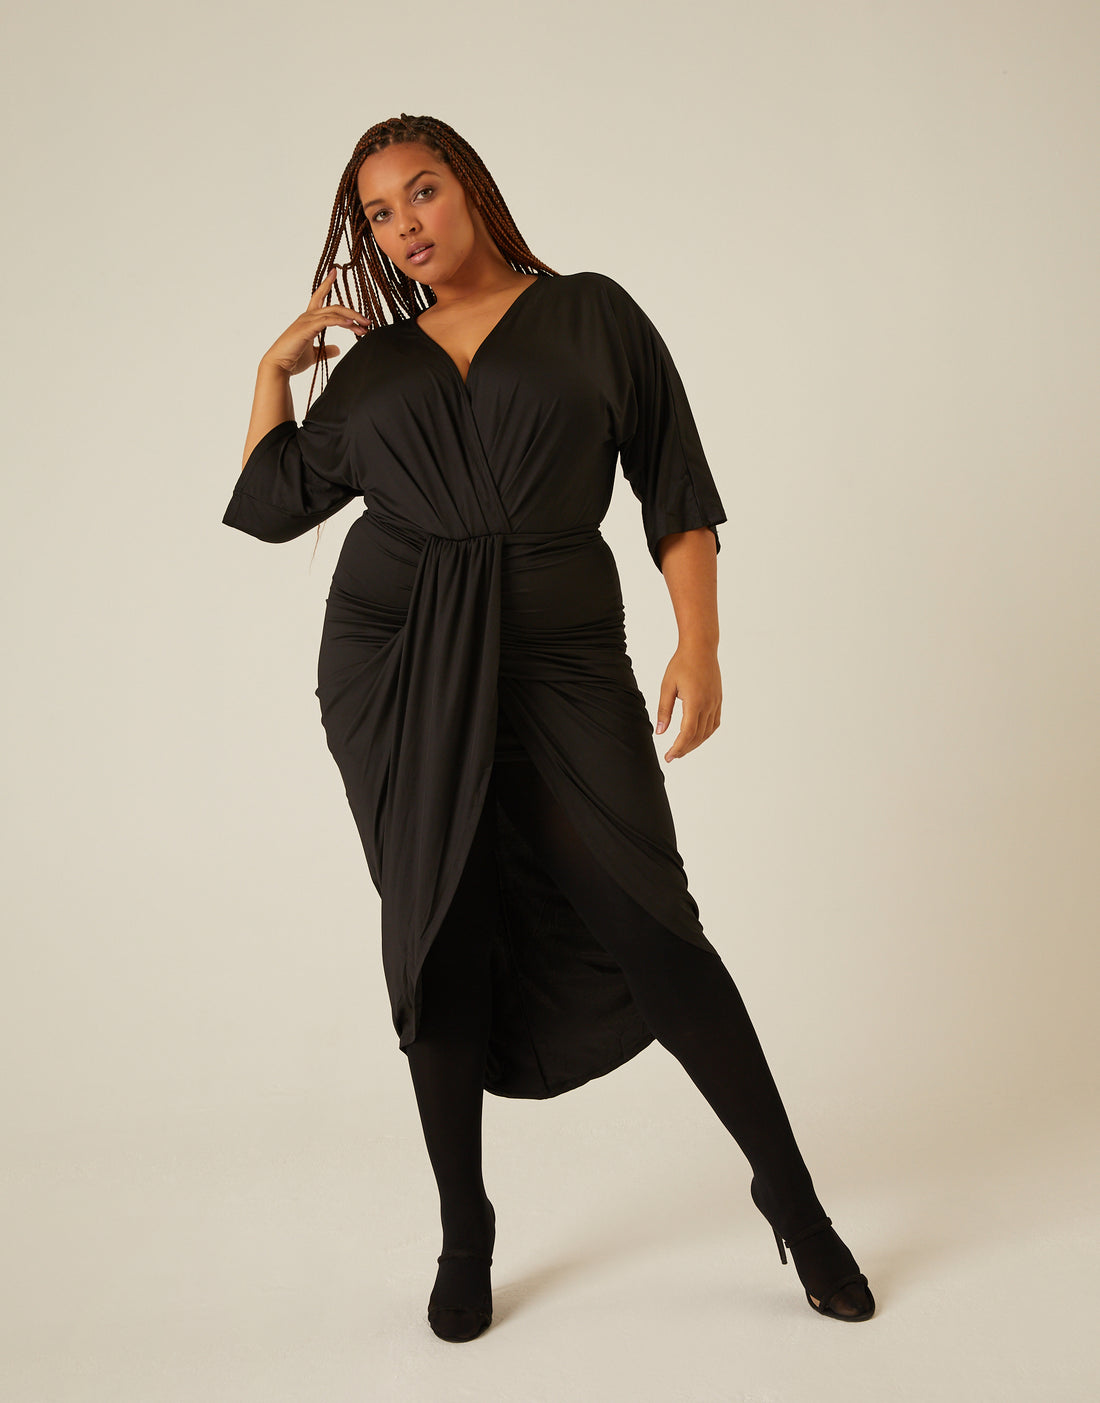 Curve Fleece Lined Tights Plus Size Intimates Black Plus Size One Size -2020AVE